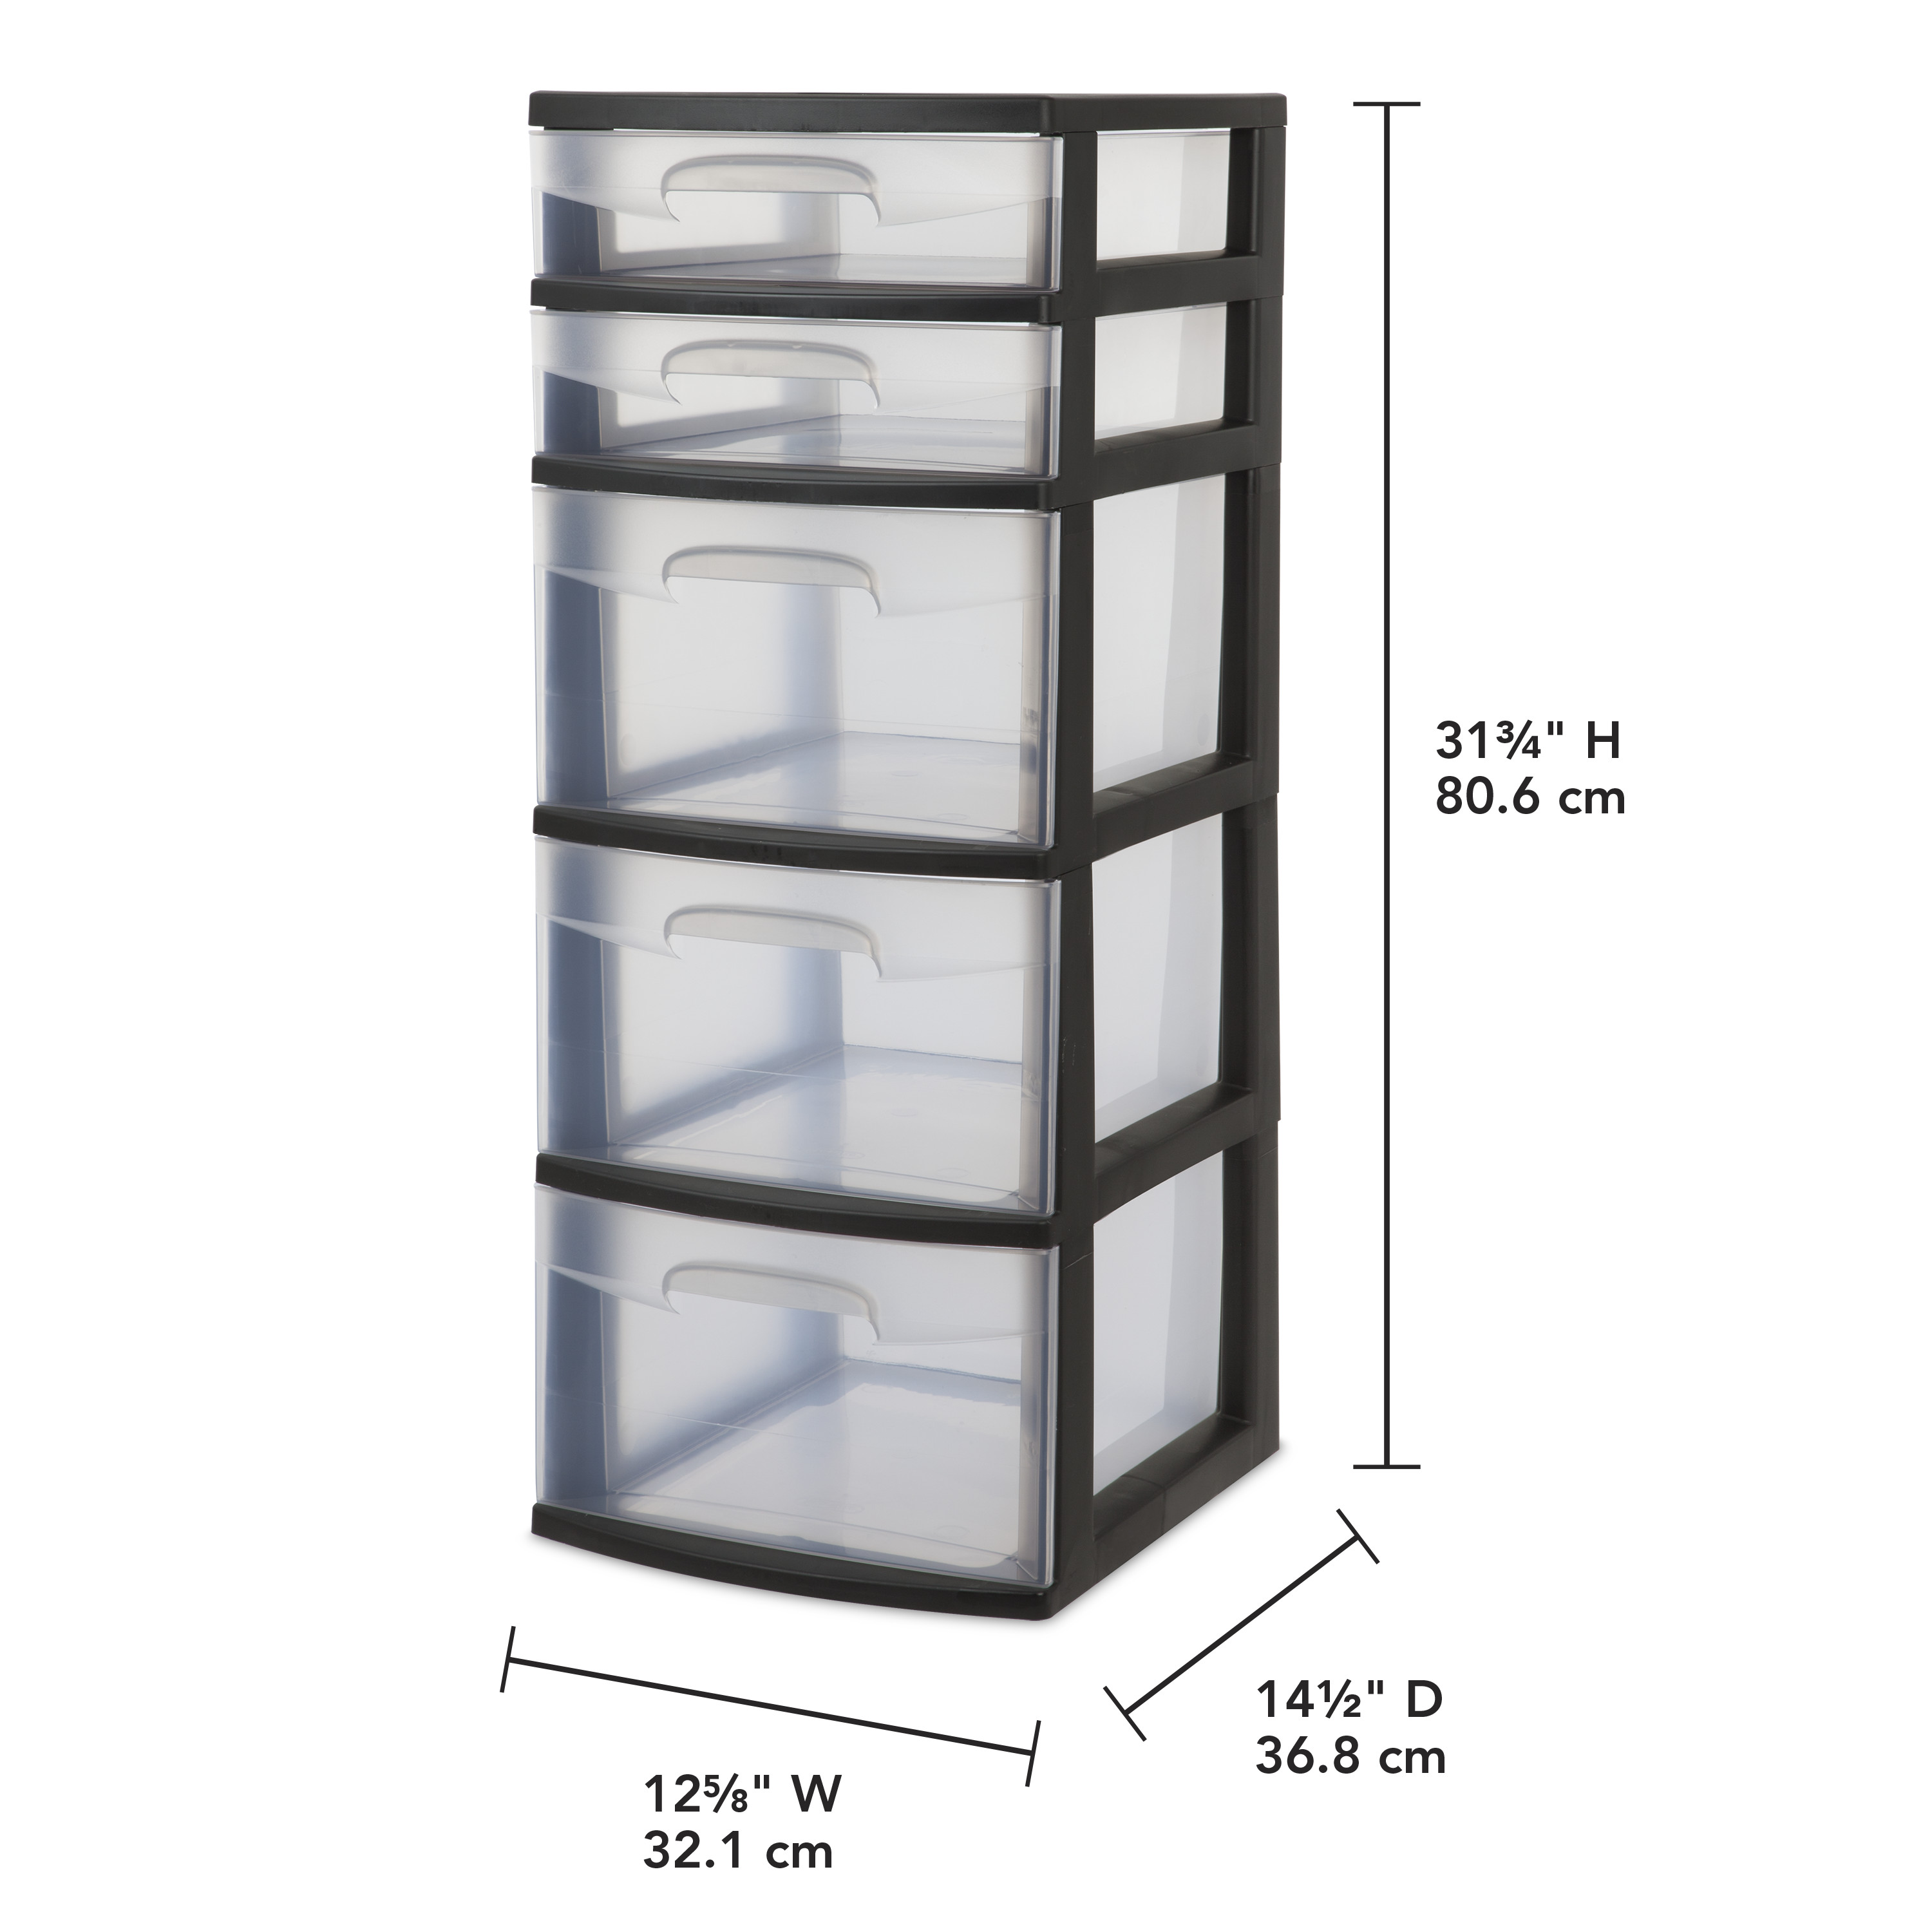 Sterilite Plastic 5-Drawer Tower, Black with Clear Drawers, Adult - image 3 of 6